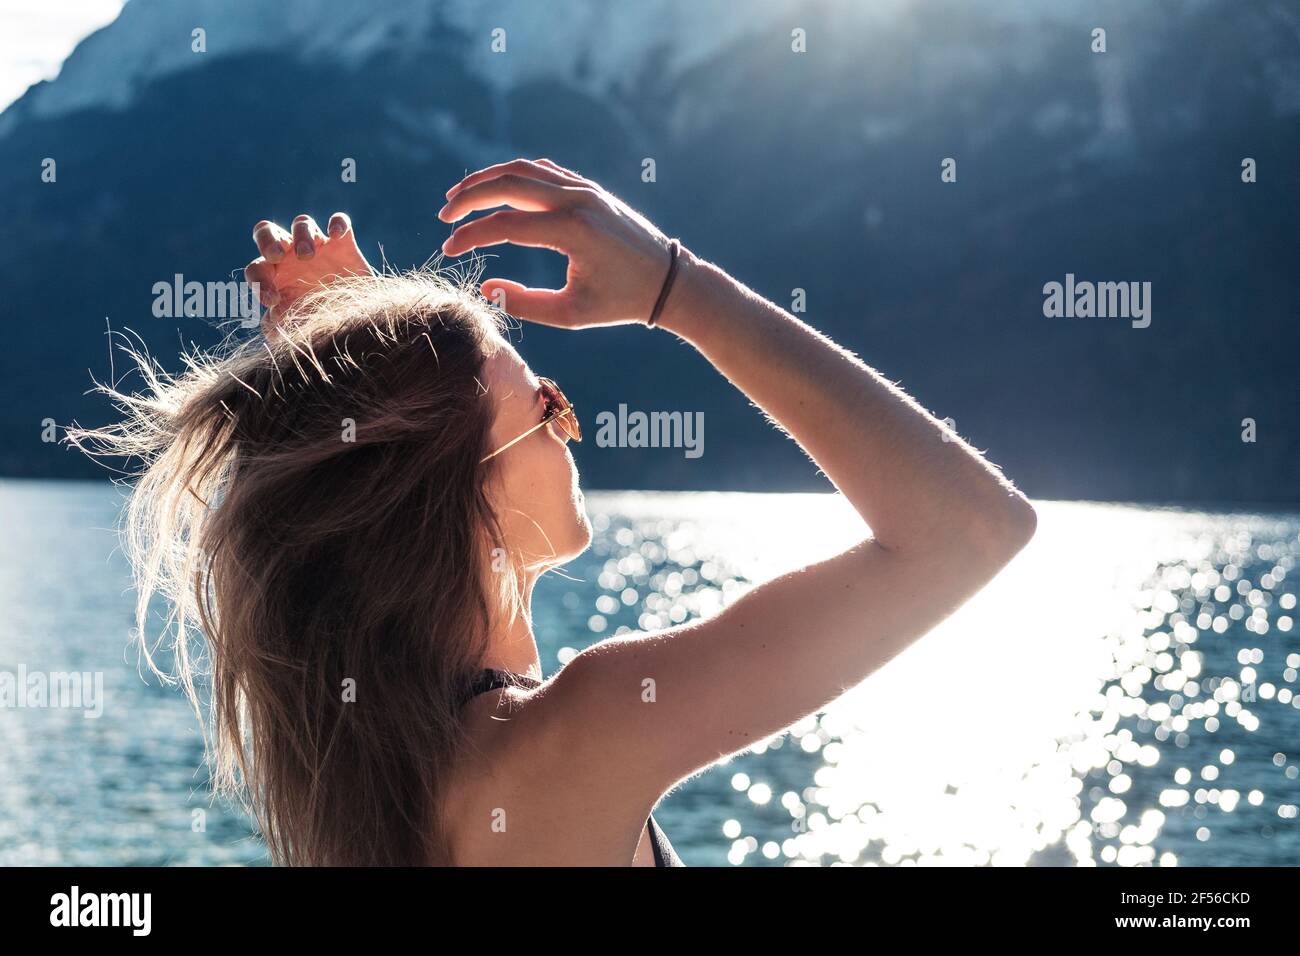 Woman with arms raised looking at view at Eibsee lake during sunny day Stock Photo